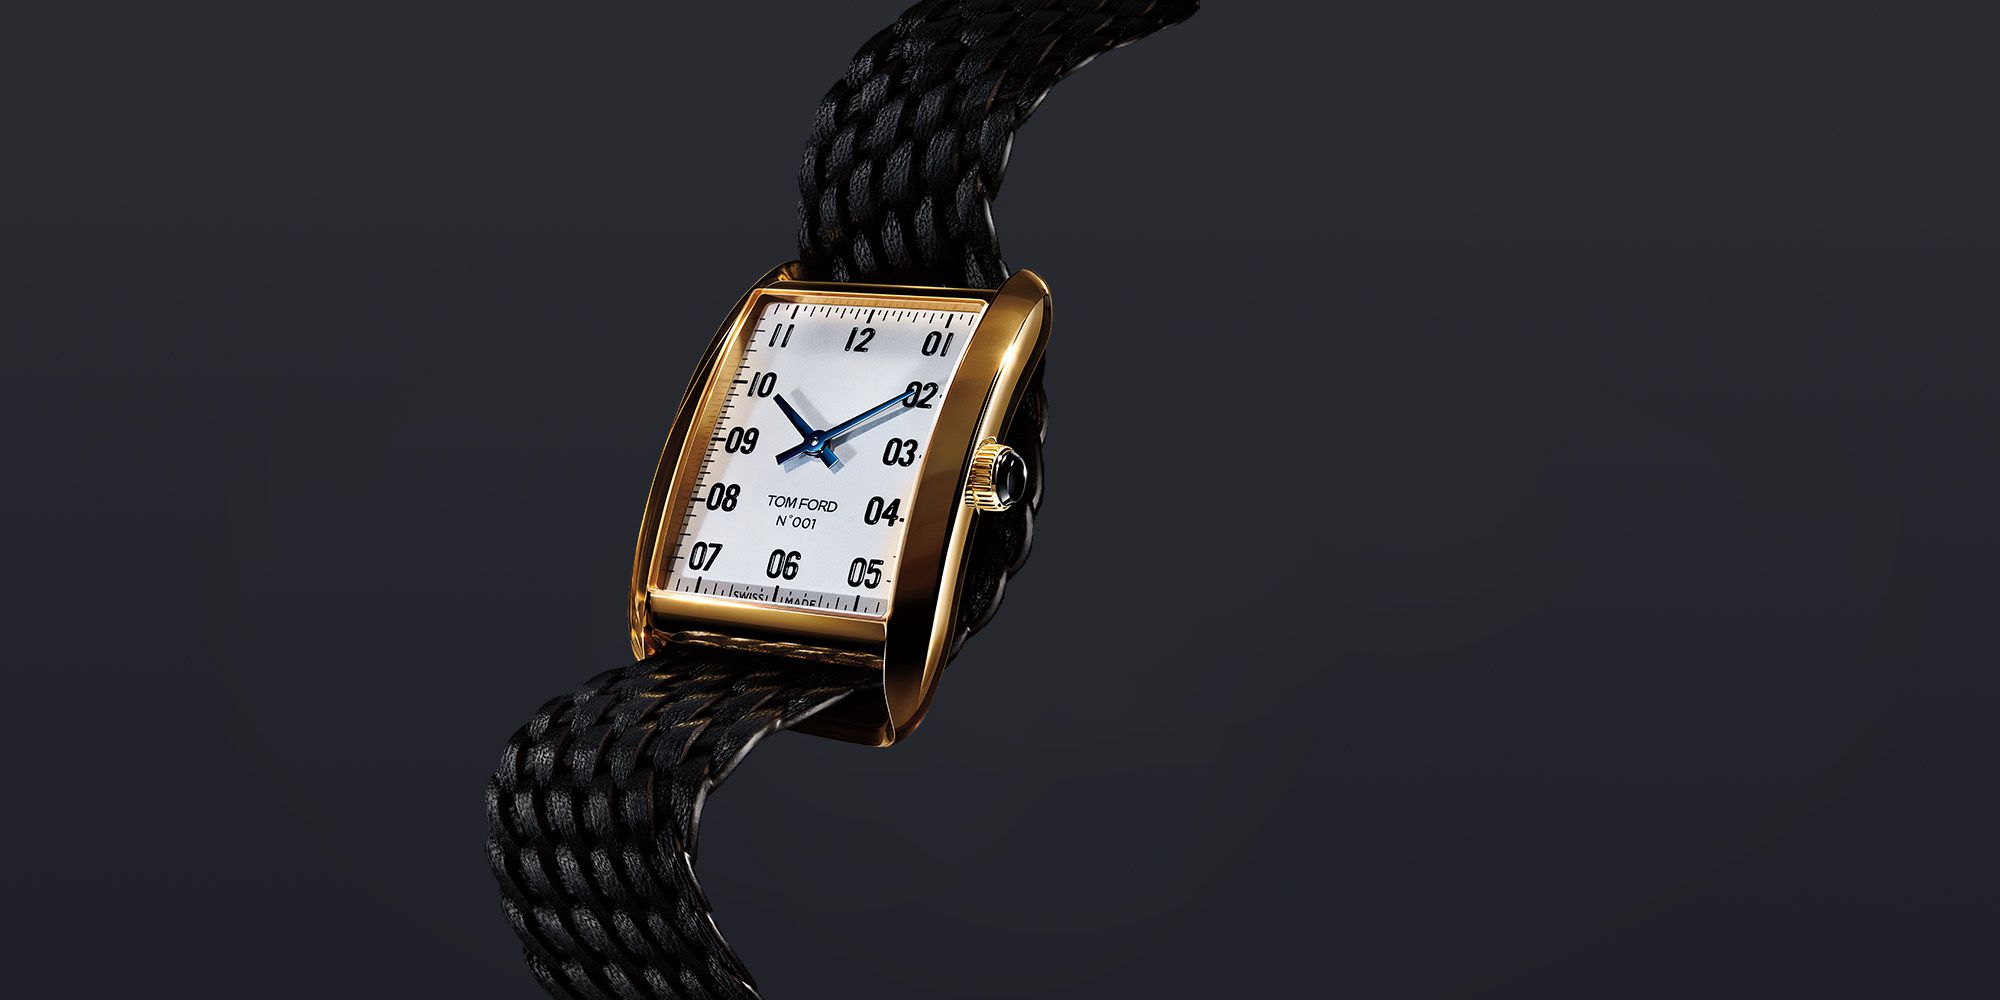 Tom Ford debuts his timepiece collection with the Tom Ford 001